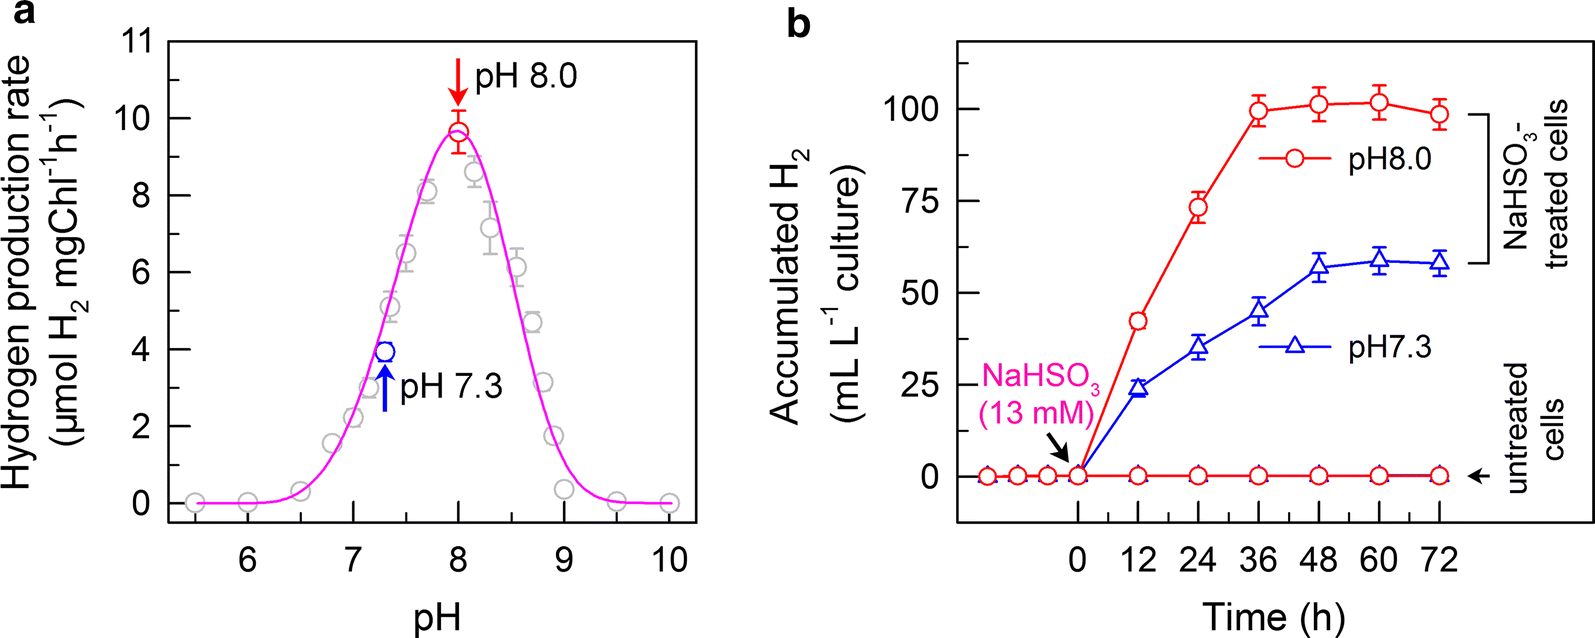 Fig. 1